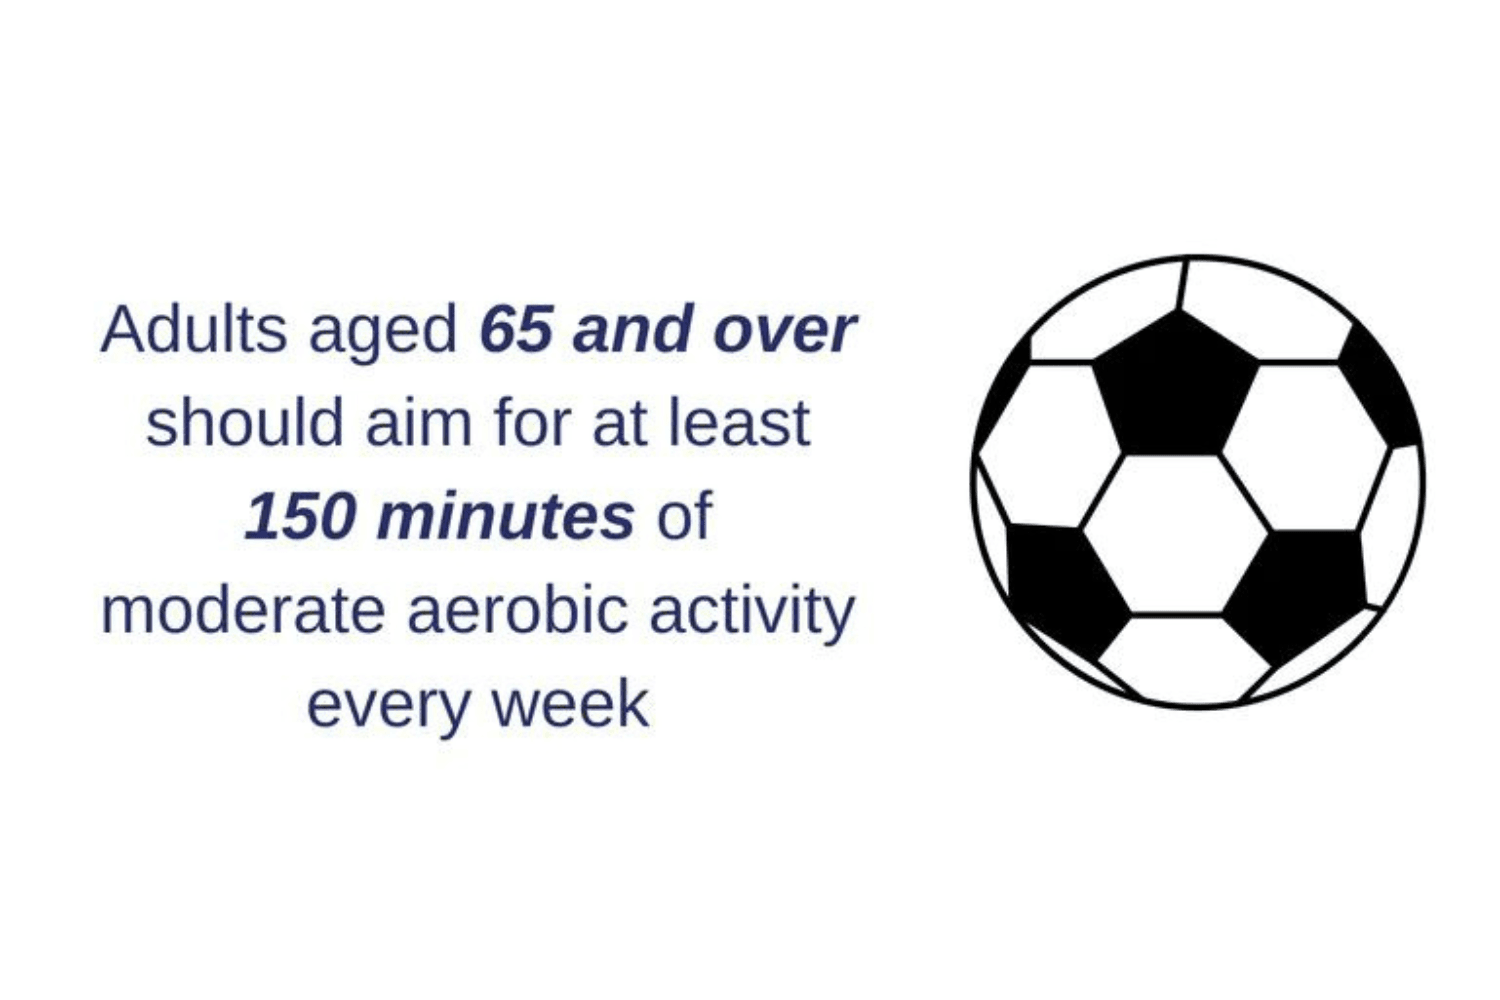 Facts about aerobic activity